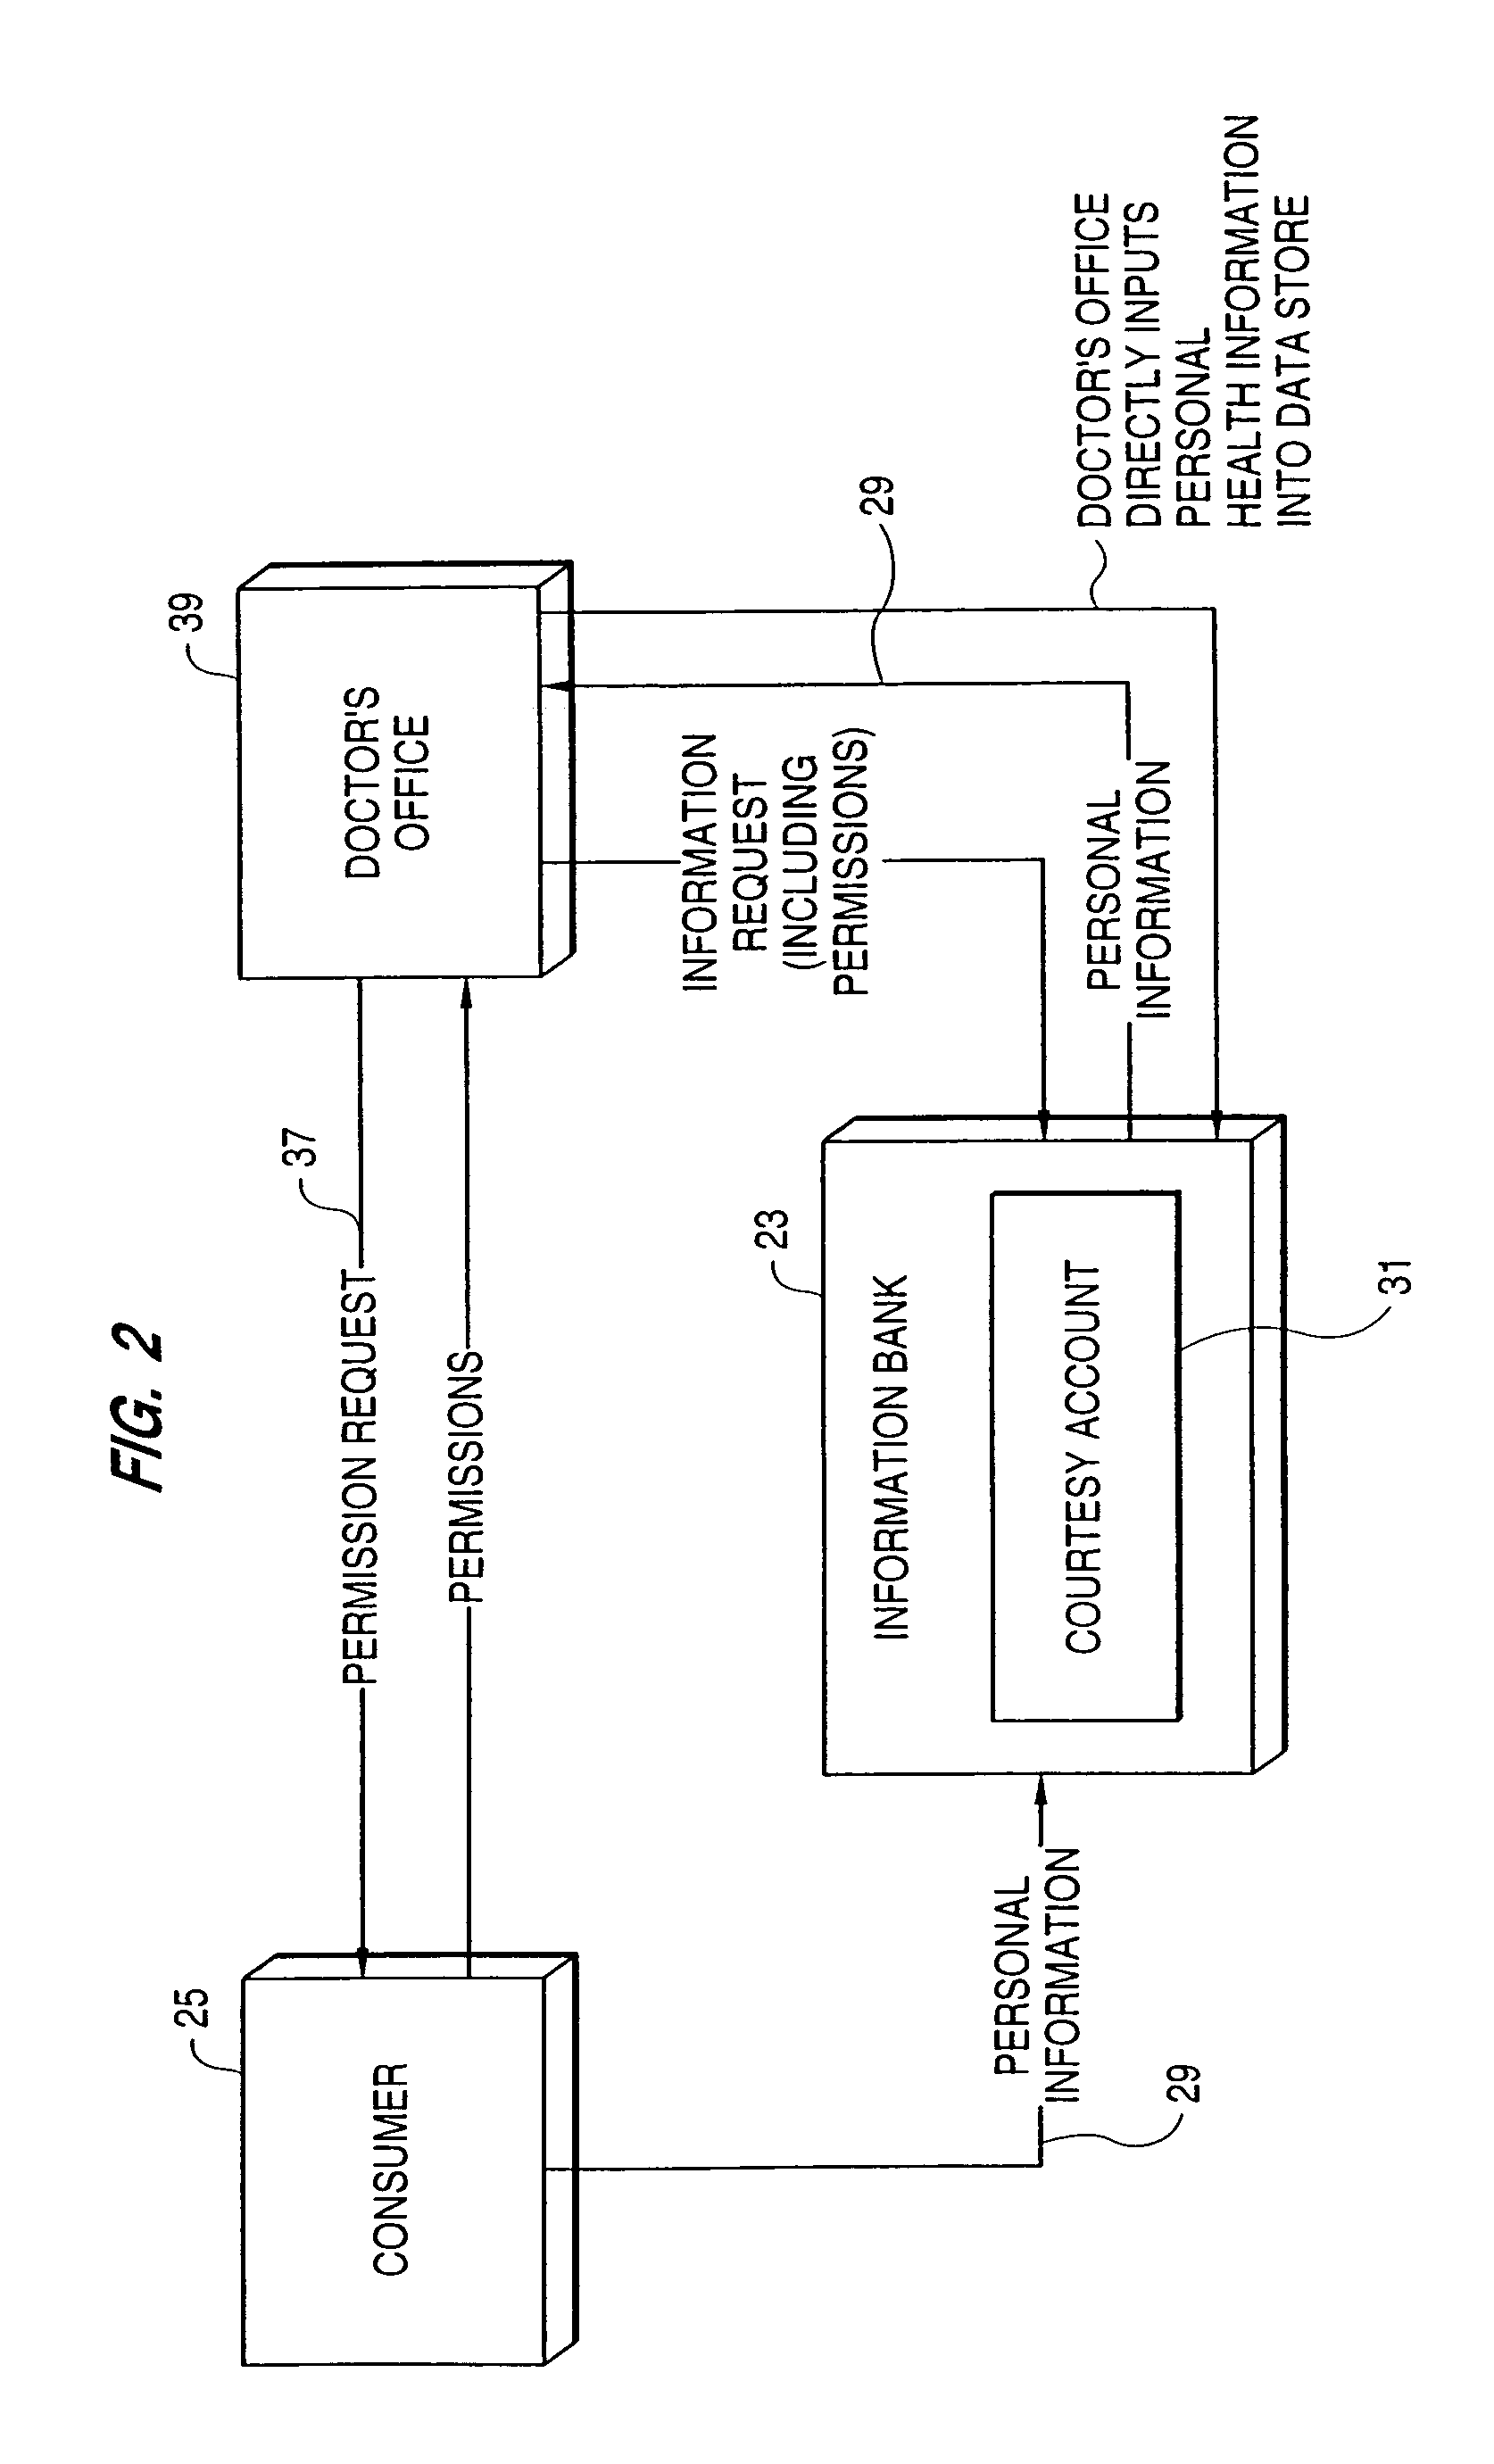 Method and system for anonymizing purchase data